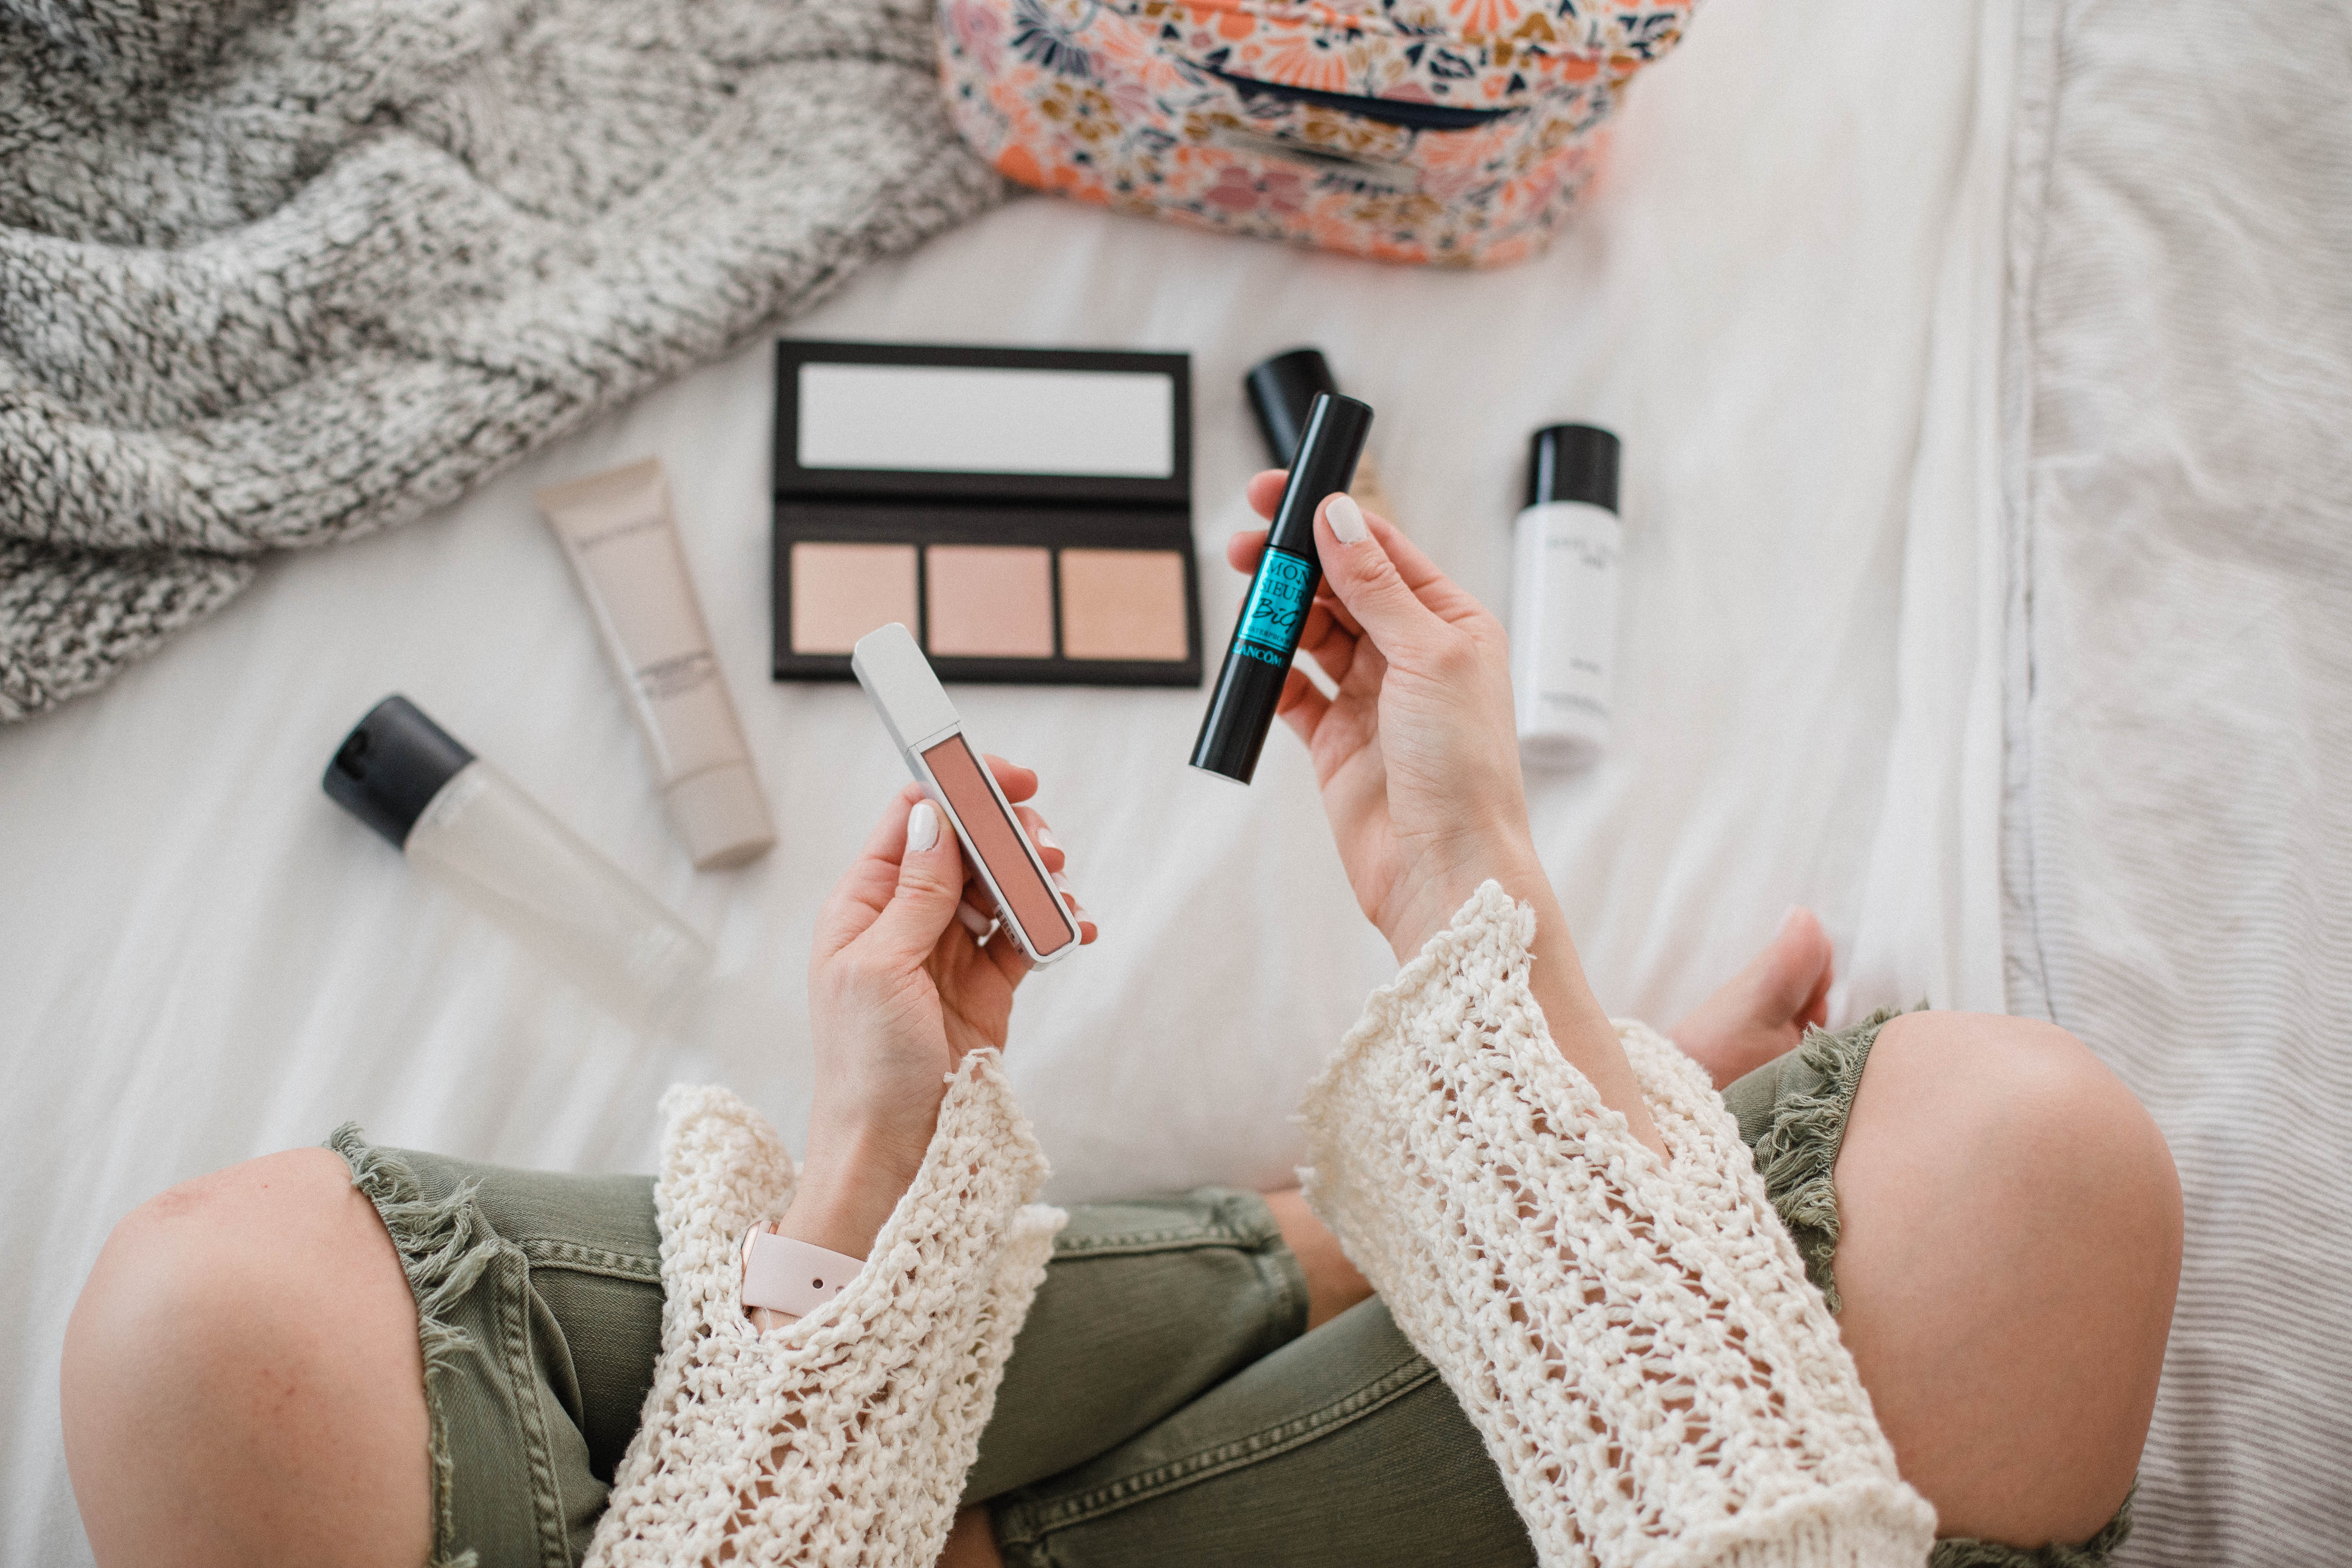 Life and style blogger Lauren McBride shares her spring beauty favorites that will keep your makeup in place and give your skin a glow all season long.